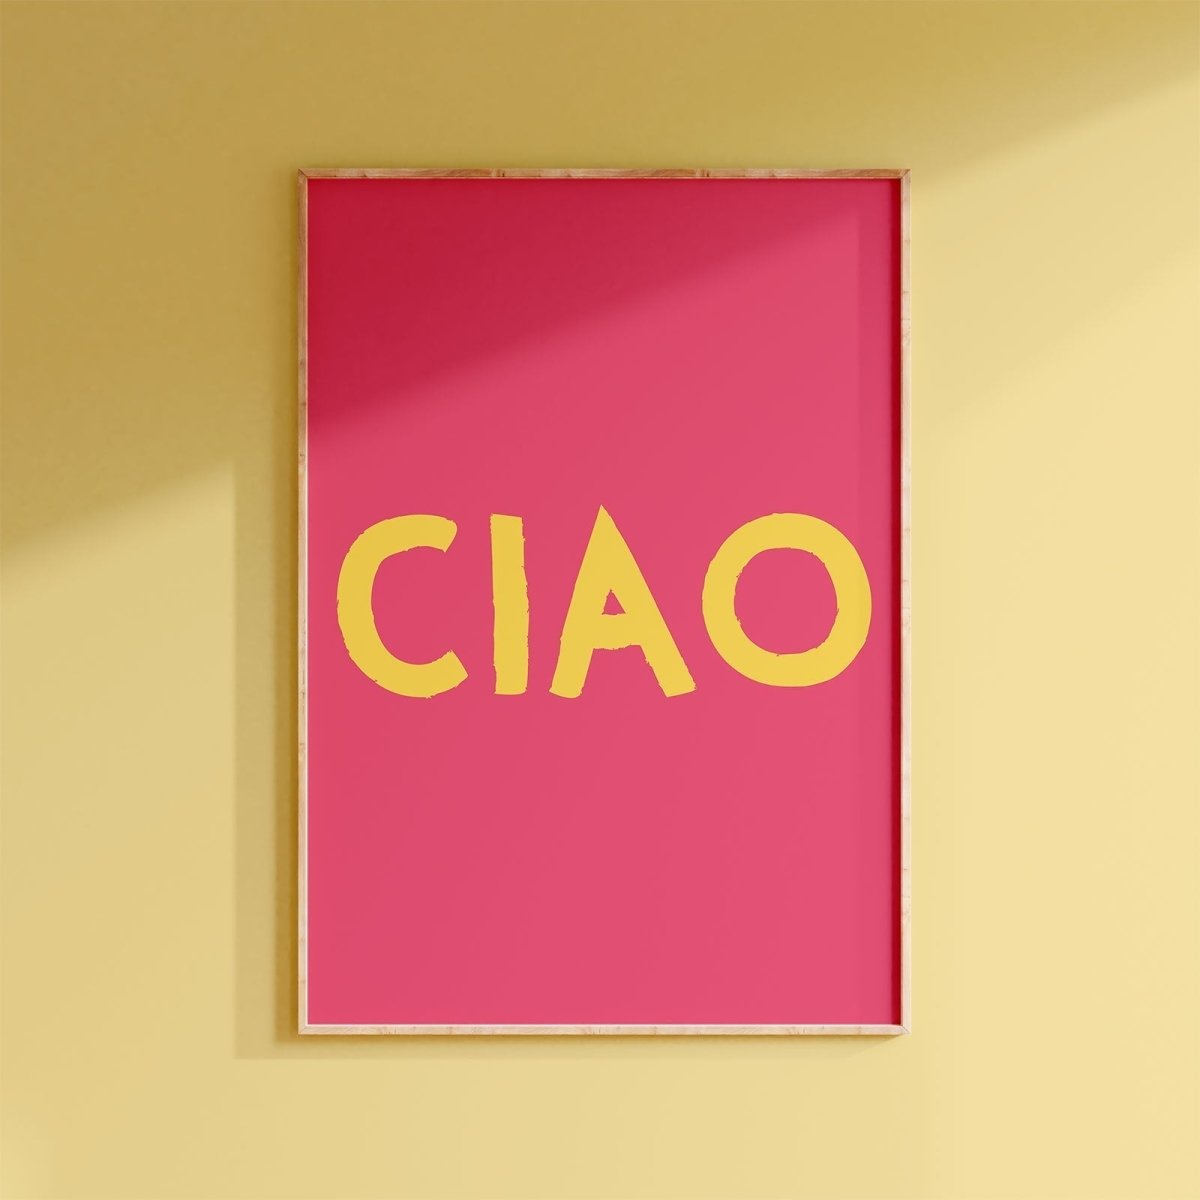 Ciao Poster • italienisches Poster • Typoposter • Ciao Poster in rosa • Spruch Poster • maximalistisches Poster • modernes Wandbild - vonSUSI